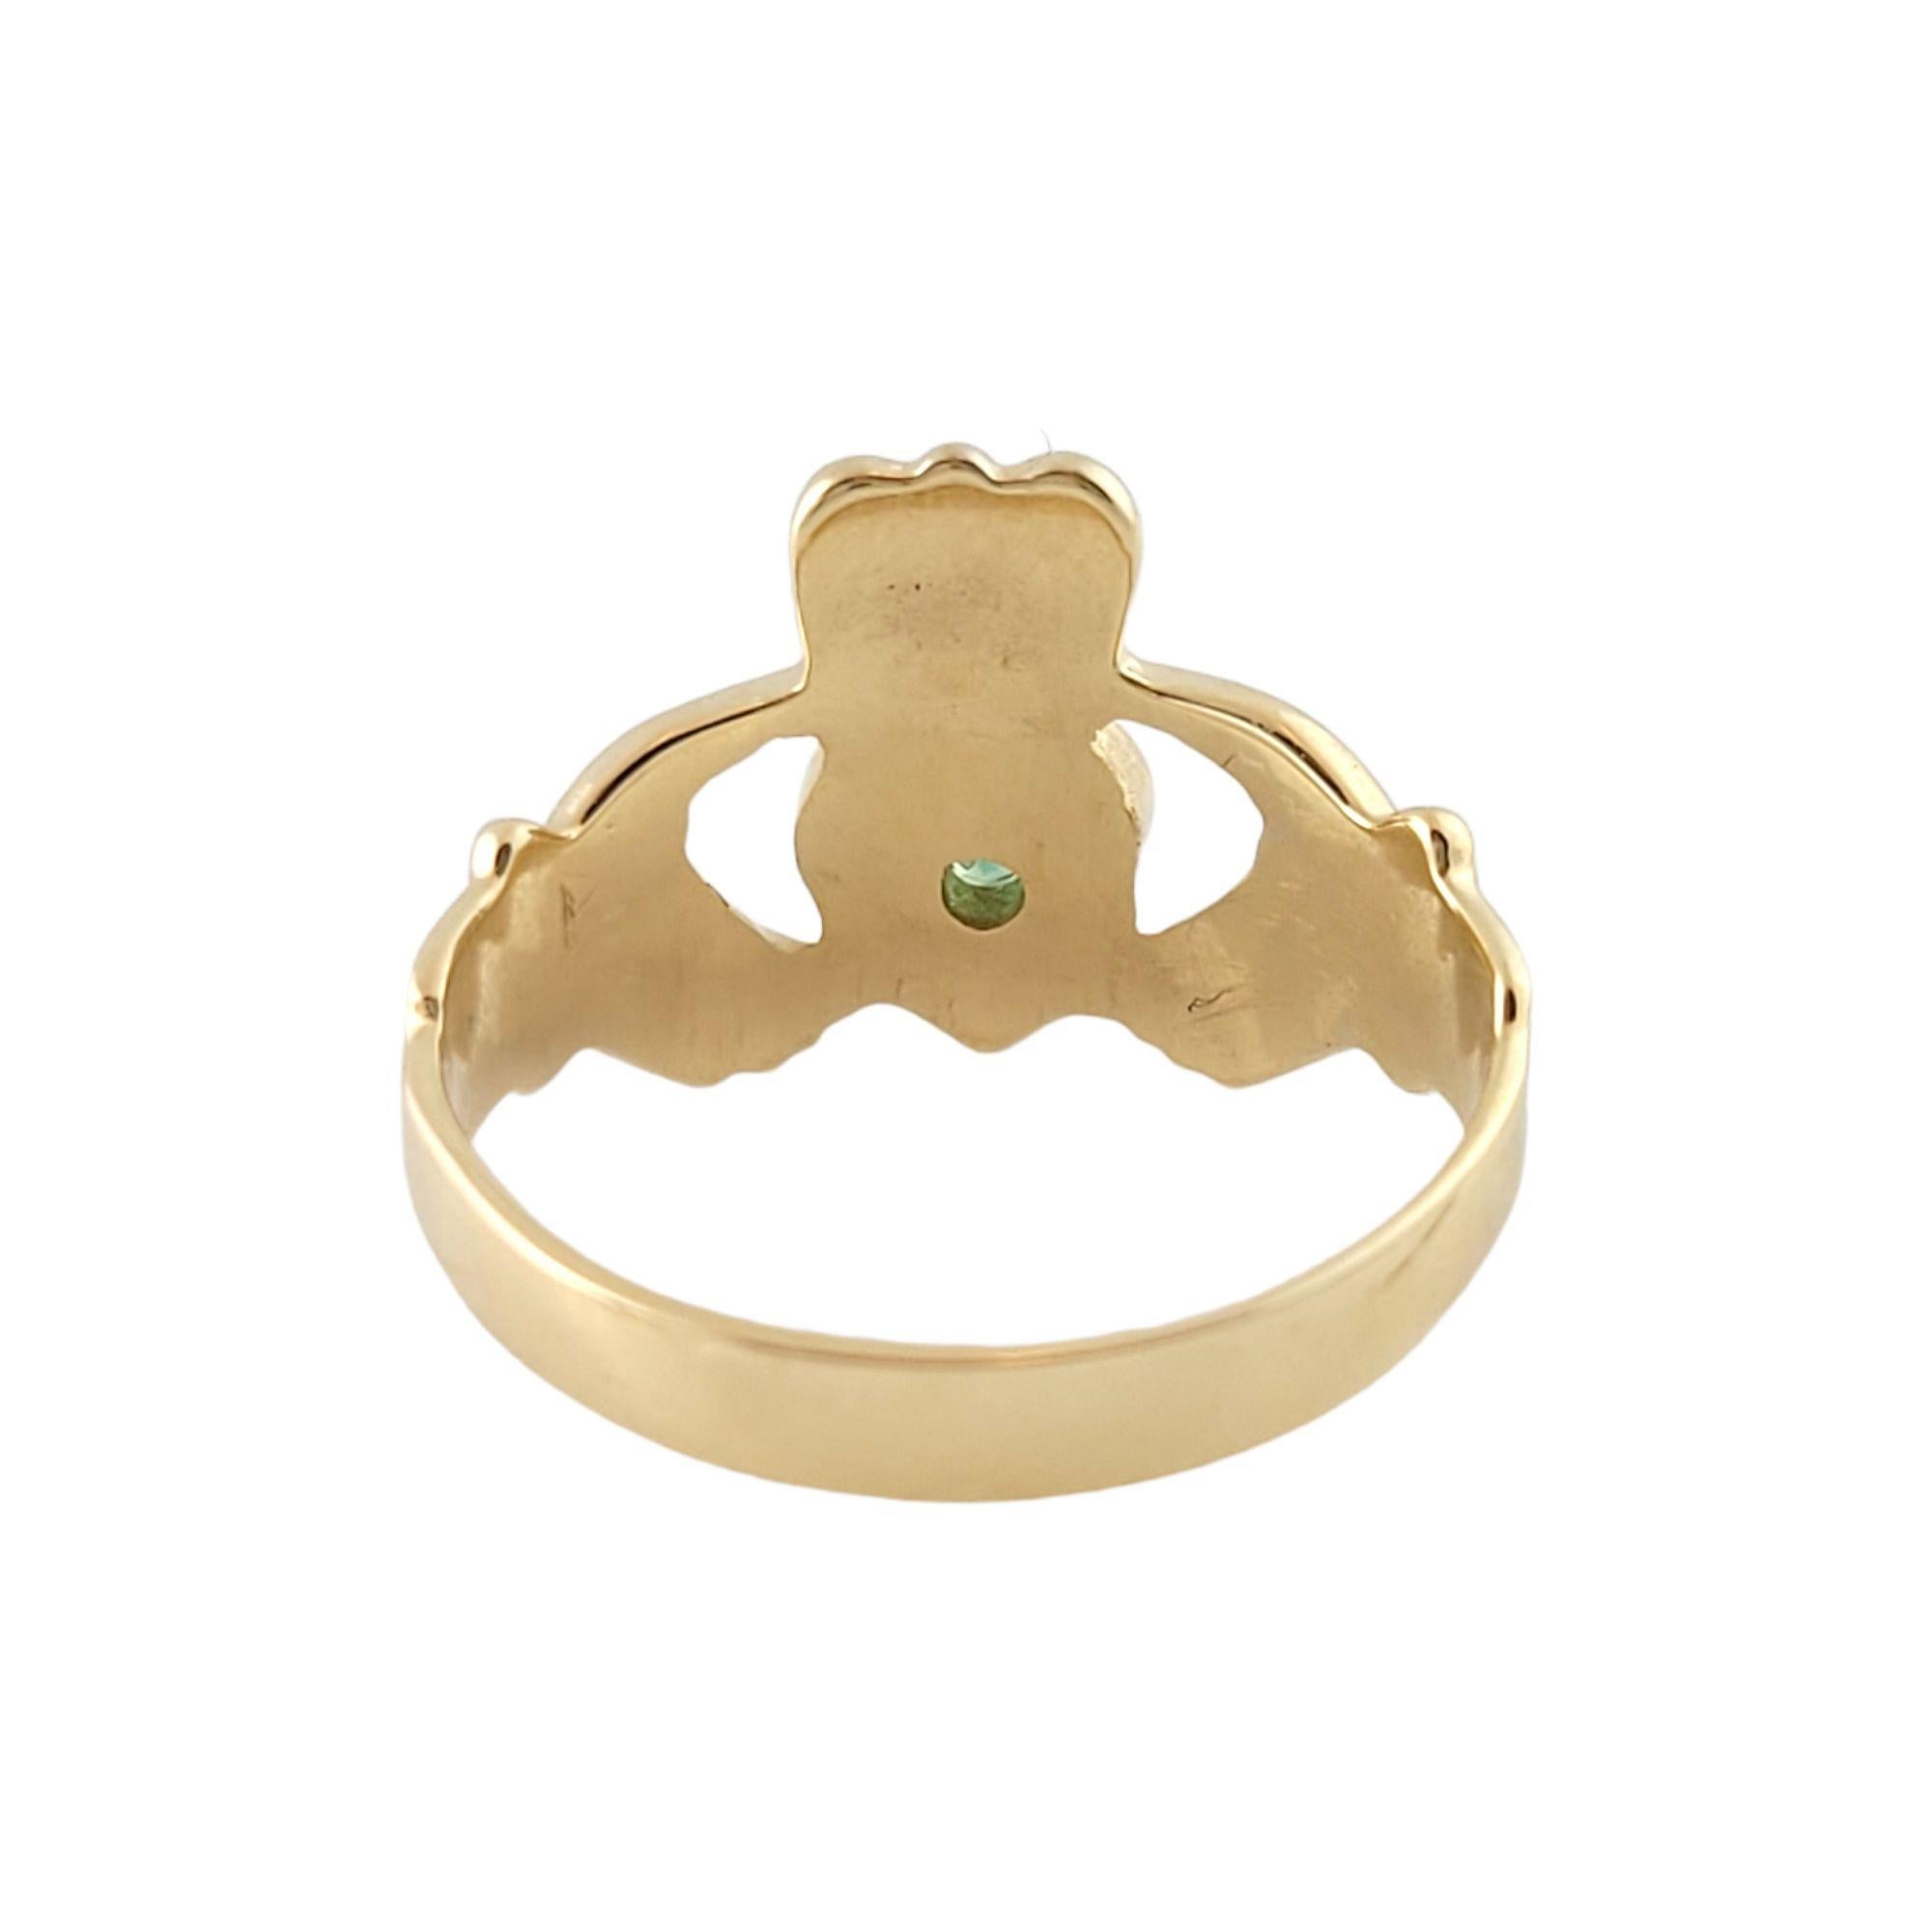 Round Cut 14k Yellow Gold Claddagh Ring with Emerald Stone